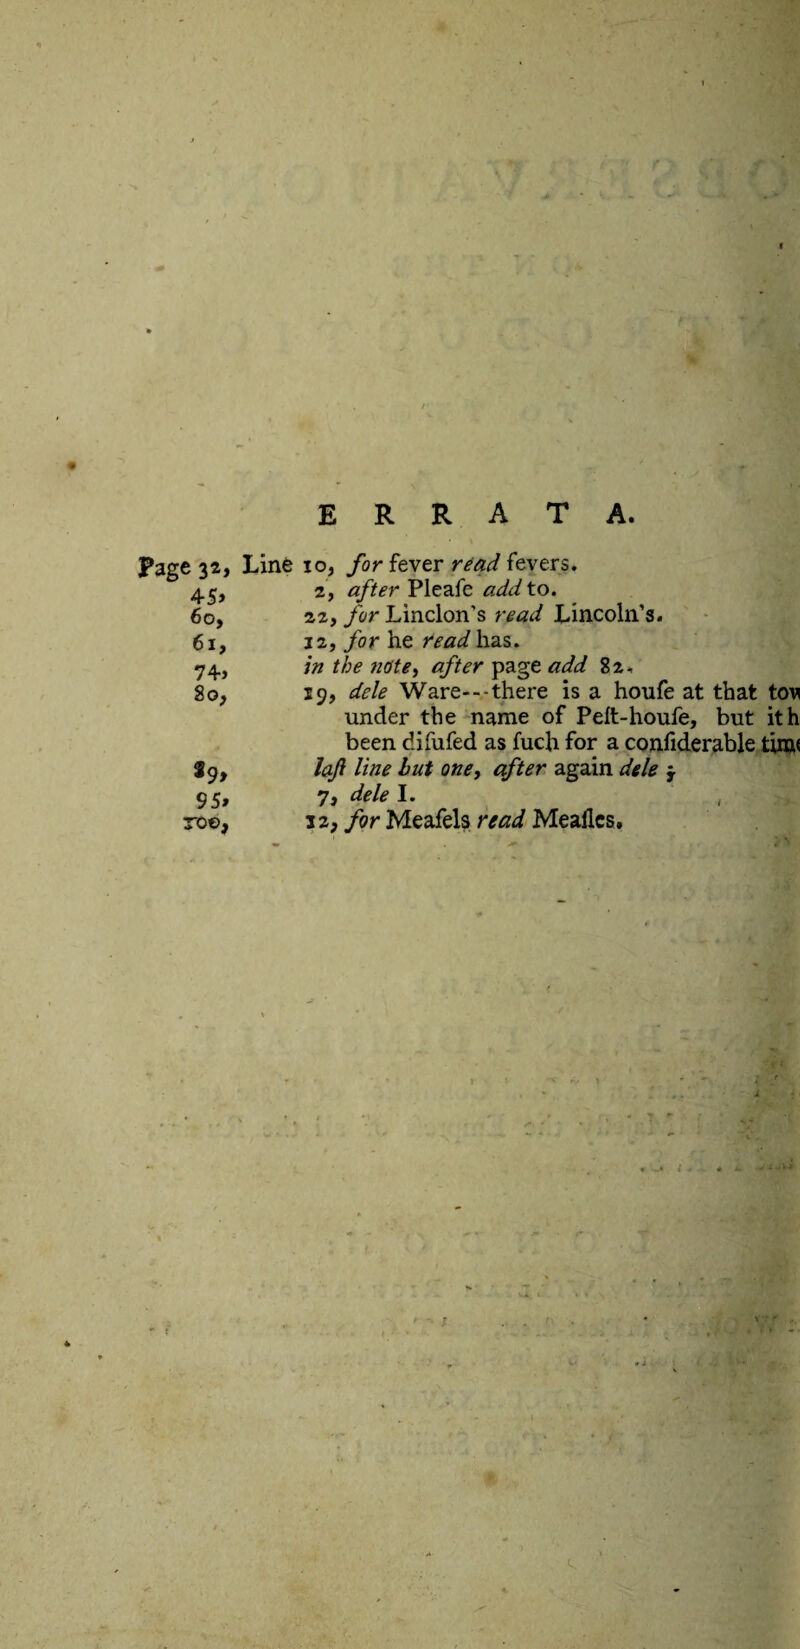 ERRATA. Page 32, Line io, for fever read fevers. 4.5, 2, after Pleafe add to. 60, 22, for Linclon’s read Lincoln’s. 61, j 2, for he read has. 74, in the note, </ter page <3^ 82, 80, 19, <&/*? Ware---there is a houfe at that tow under the name of Peft-houfe, but ith been diiufed as fuch for a confiderable tim< Sg, laji line hut one, after again dele j. 95> 7j dele I. ( roe, 12, /or Meafels r^ Mealies.